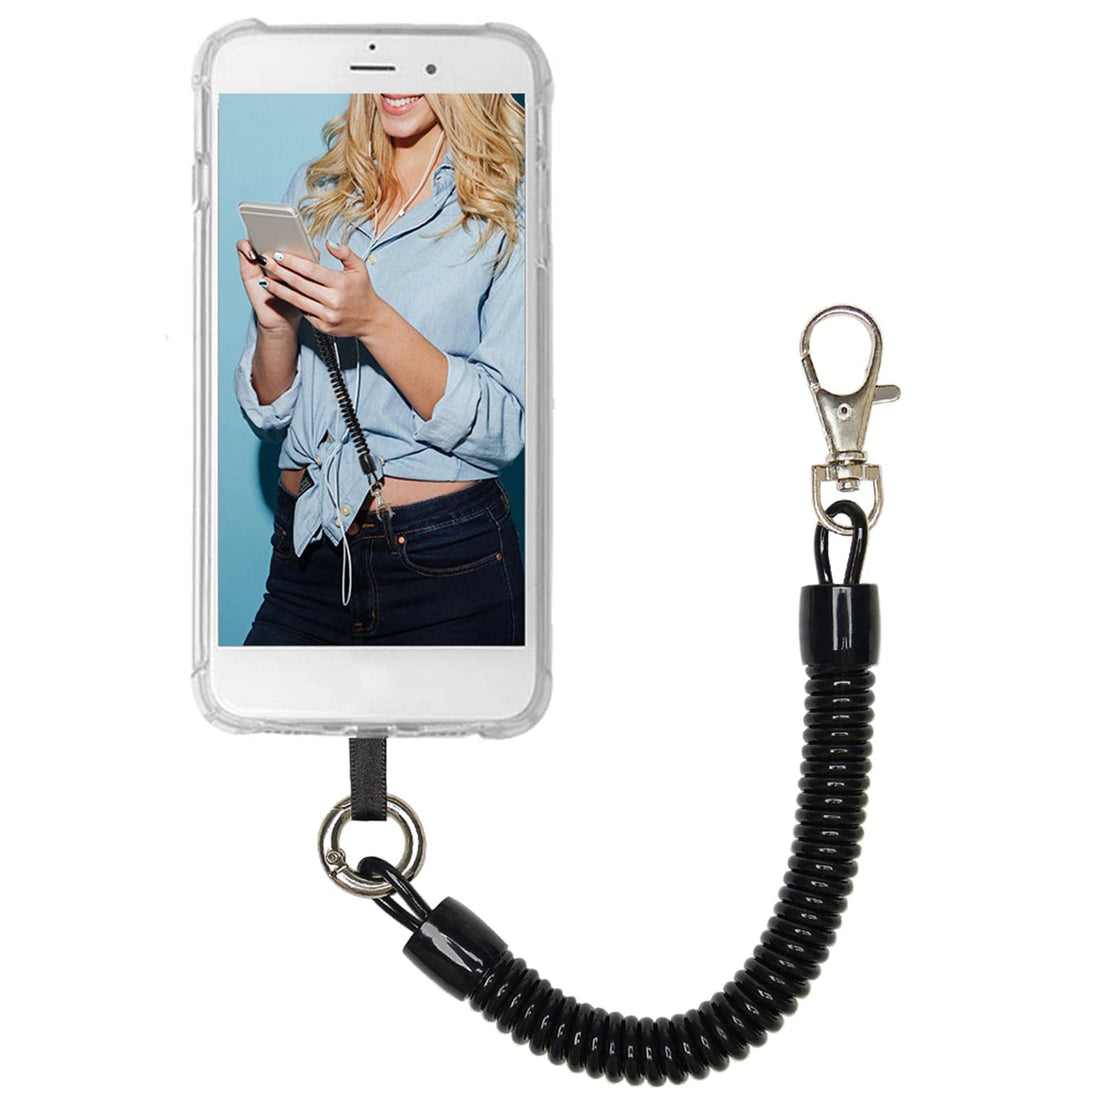 Rave-Essentials Co. All Black Sling Anti-Theft Phone Tether